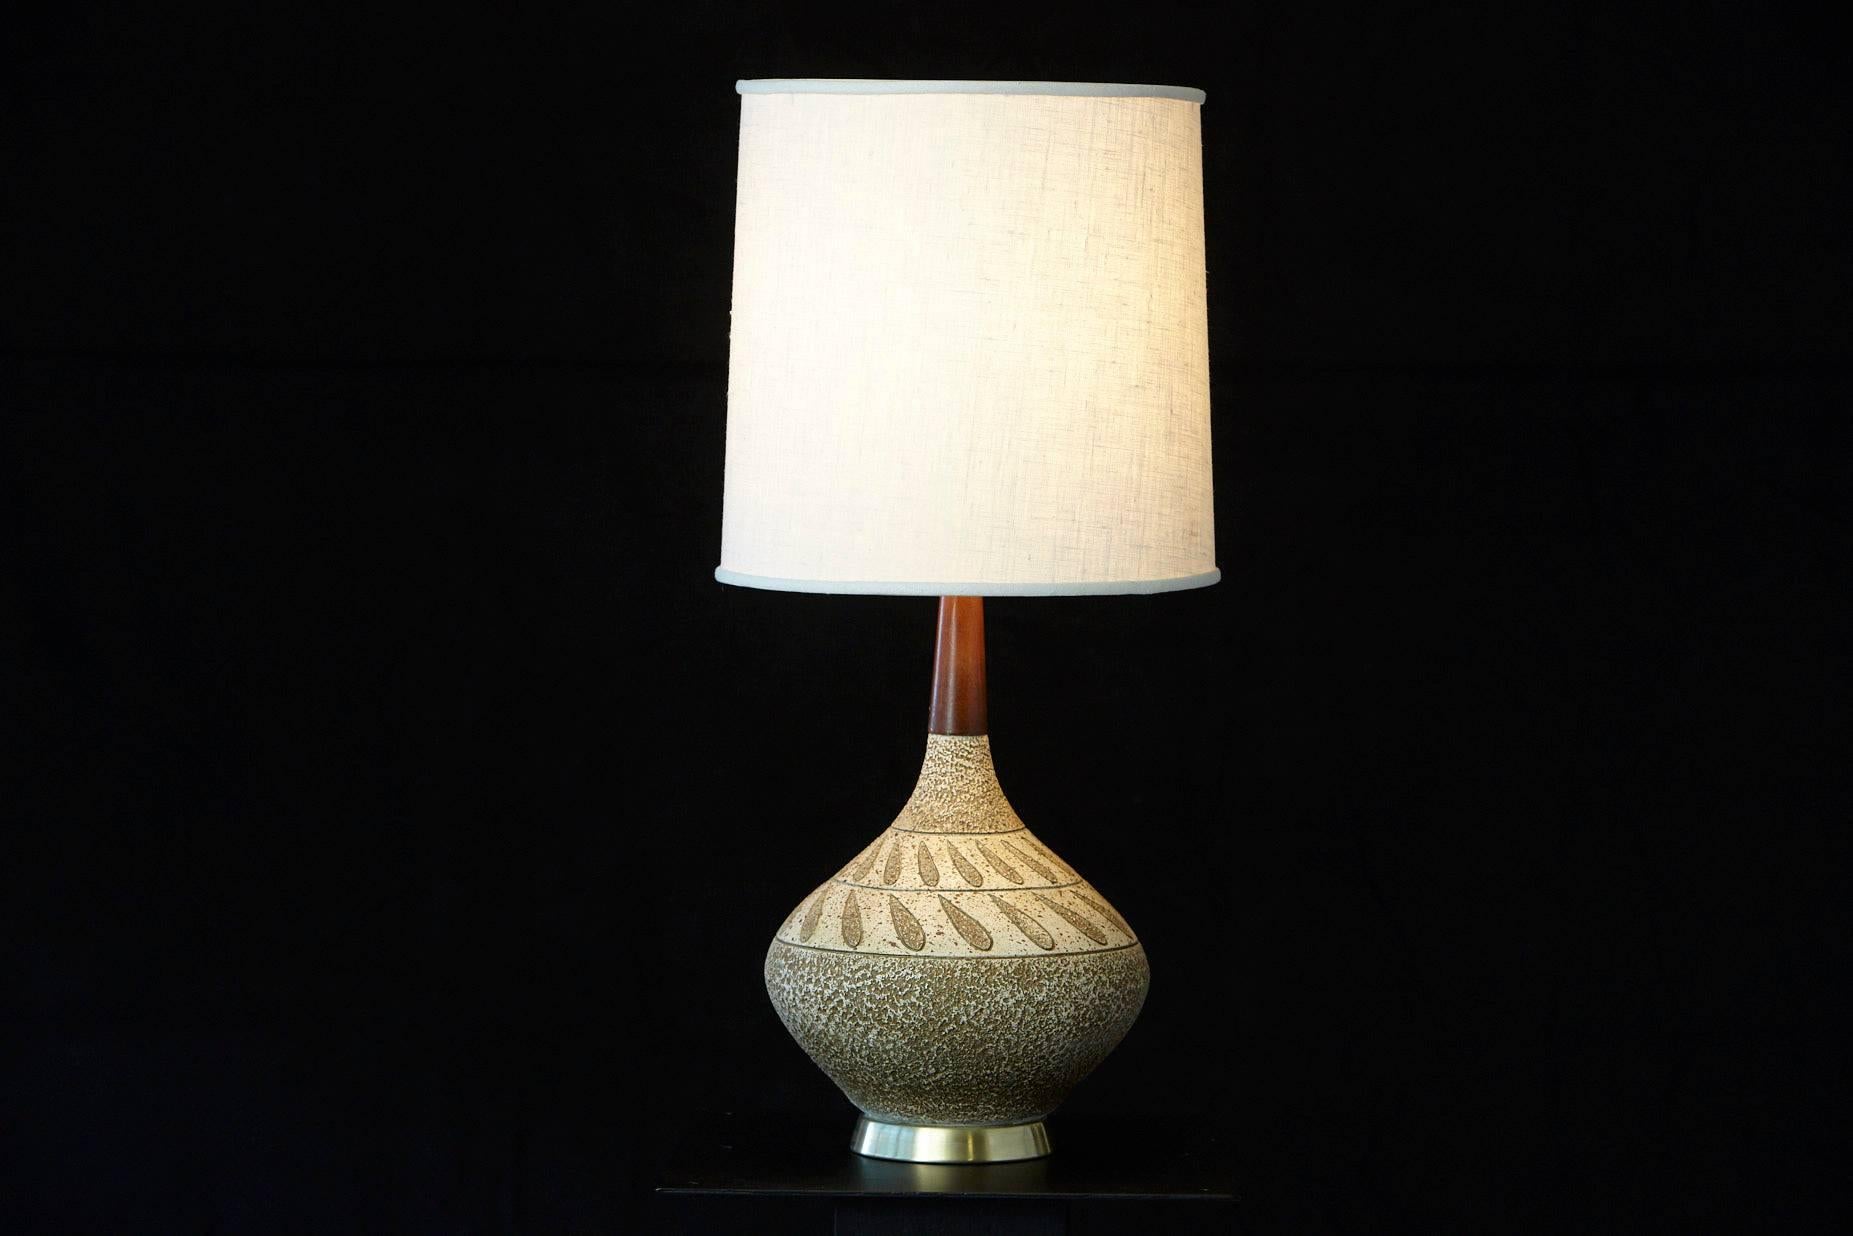 Ceramic gourd shape table lamp with teak neck and brass base, 1960s.
Very good condition. Height to finial 30.5